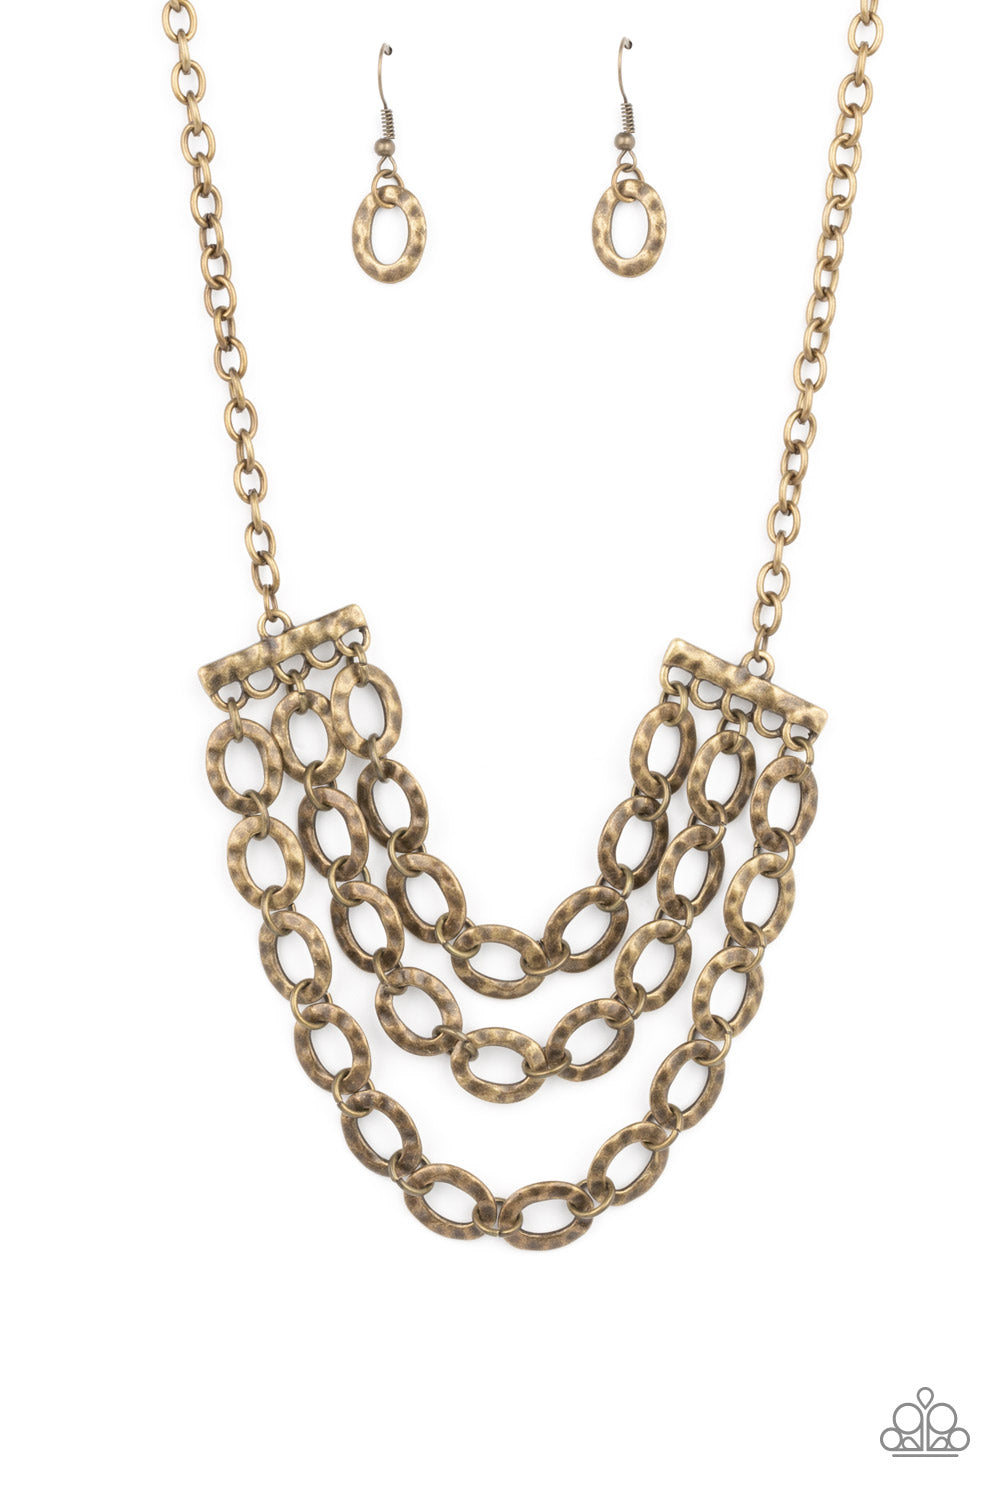 Repeat After Me - brass - Paparazzi necklace